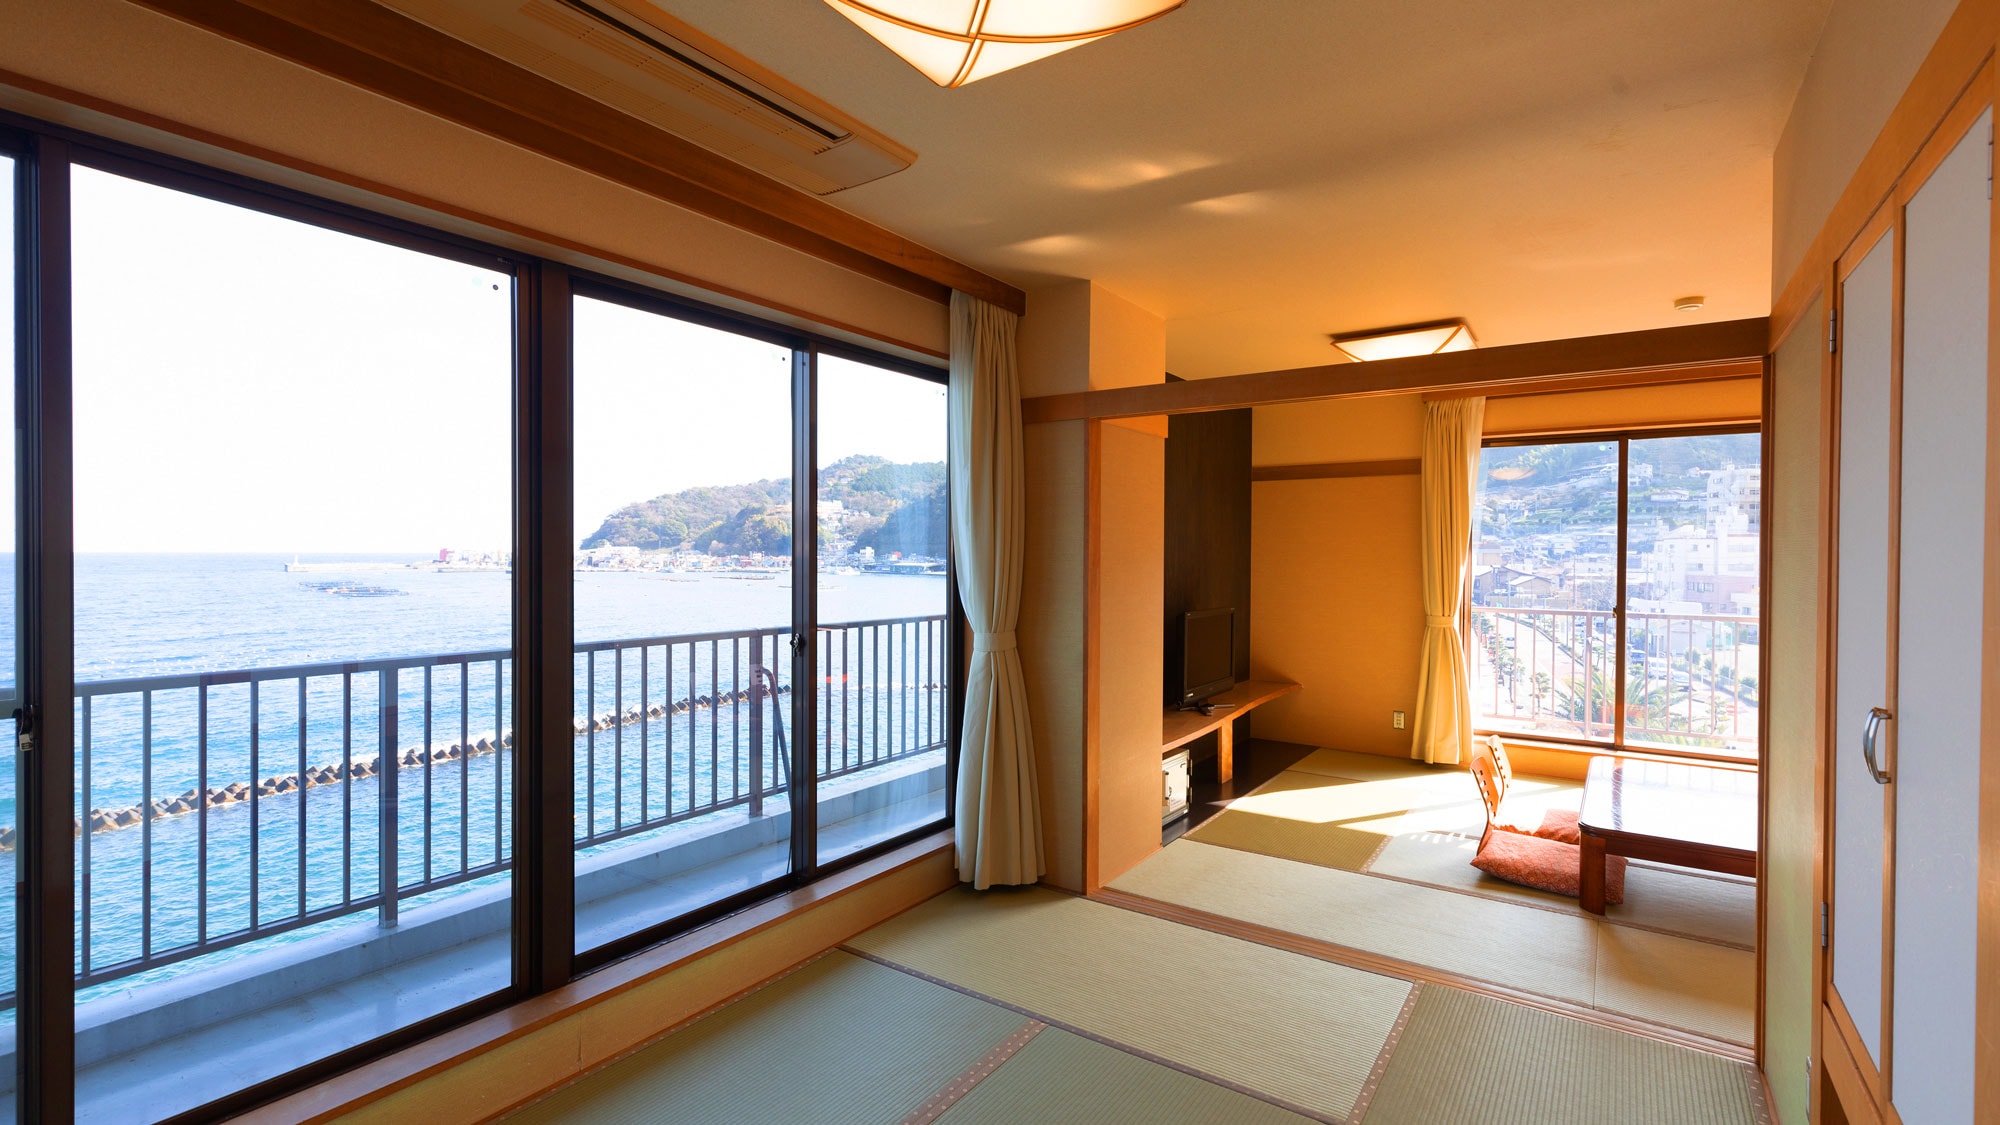 An example of an oceanfront Japanese-style room